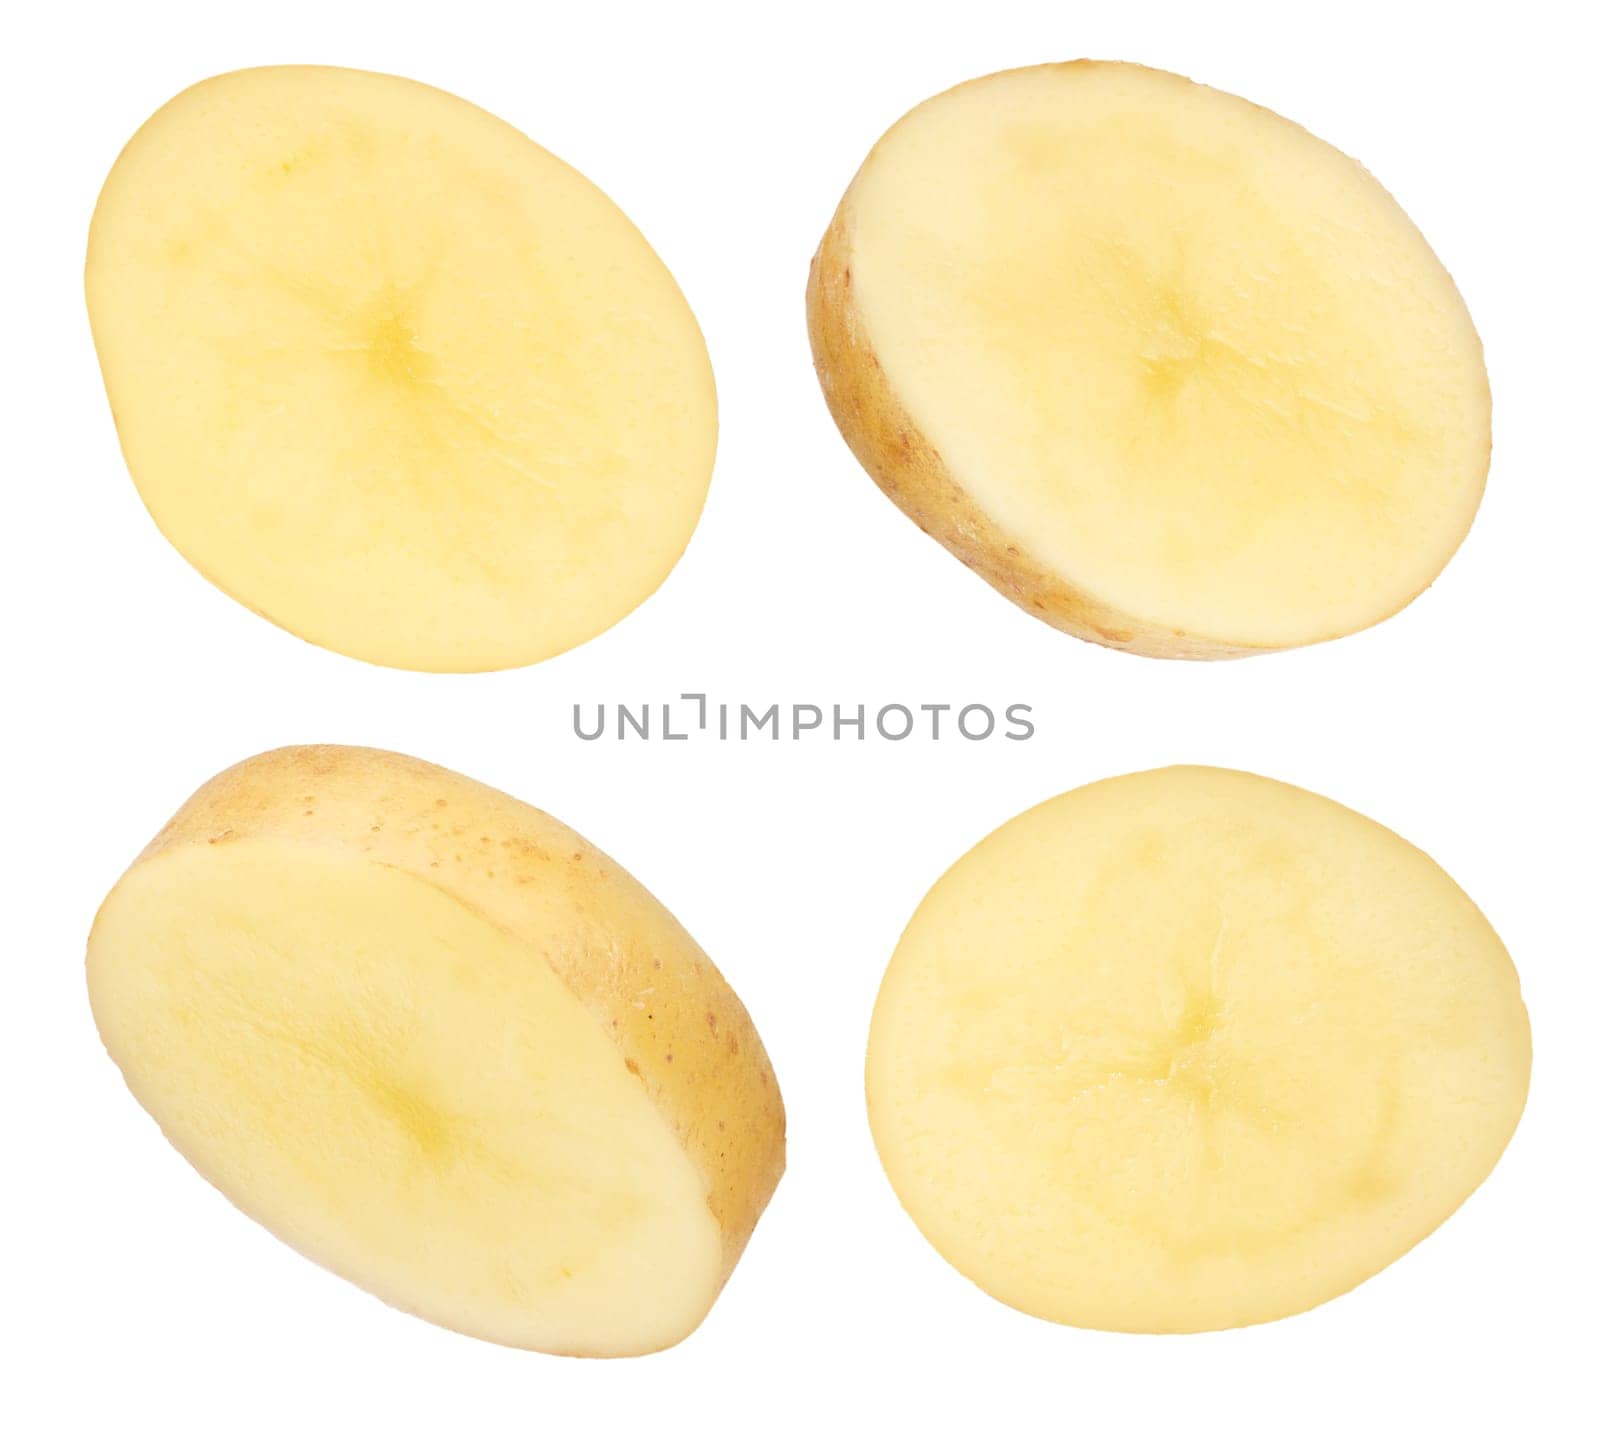 Raw vegetables. Potato wedges with peel isolated on white background. The concept of not healthy eating or obesity from potatoes. To be inserted into a design or project. High quality photo